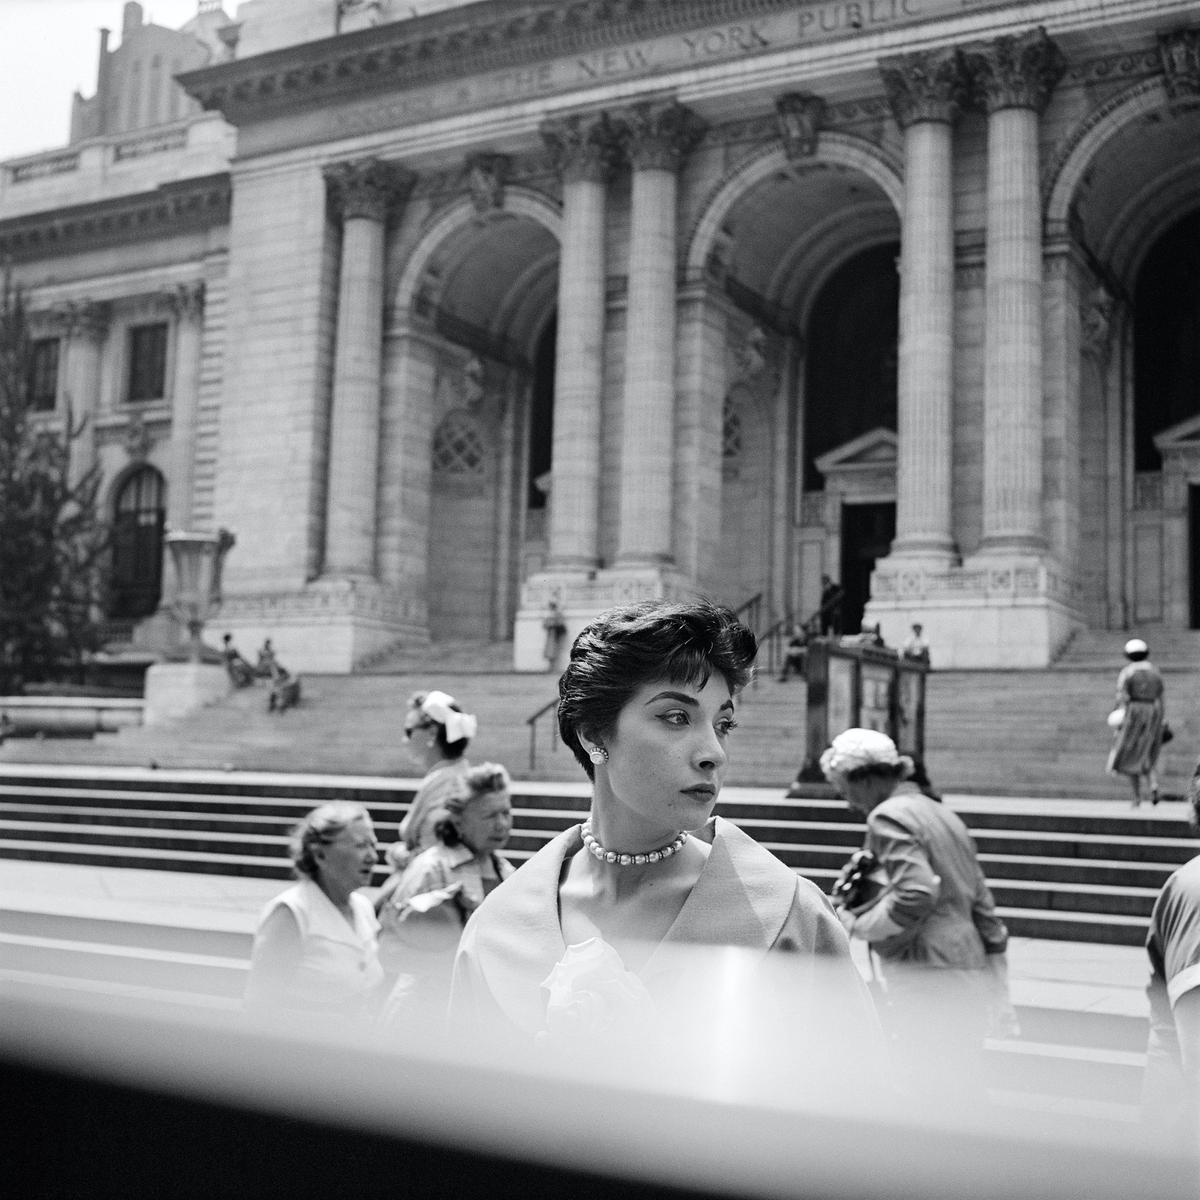 Vivian Maier, New York public library (around 1954/2012) © Estate of Vivian Maier, Courtesy of Maloof Collection and Howard Greenberg Gallery, NY